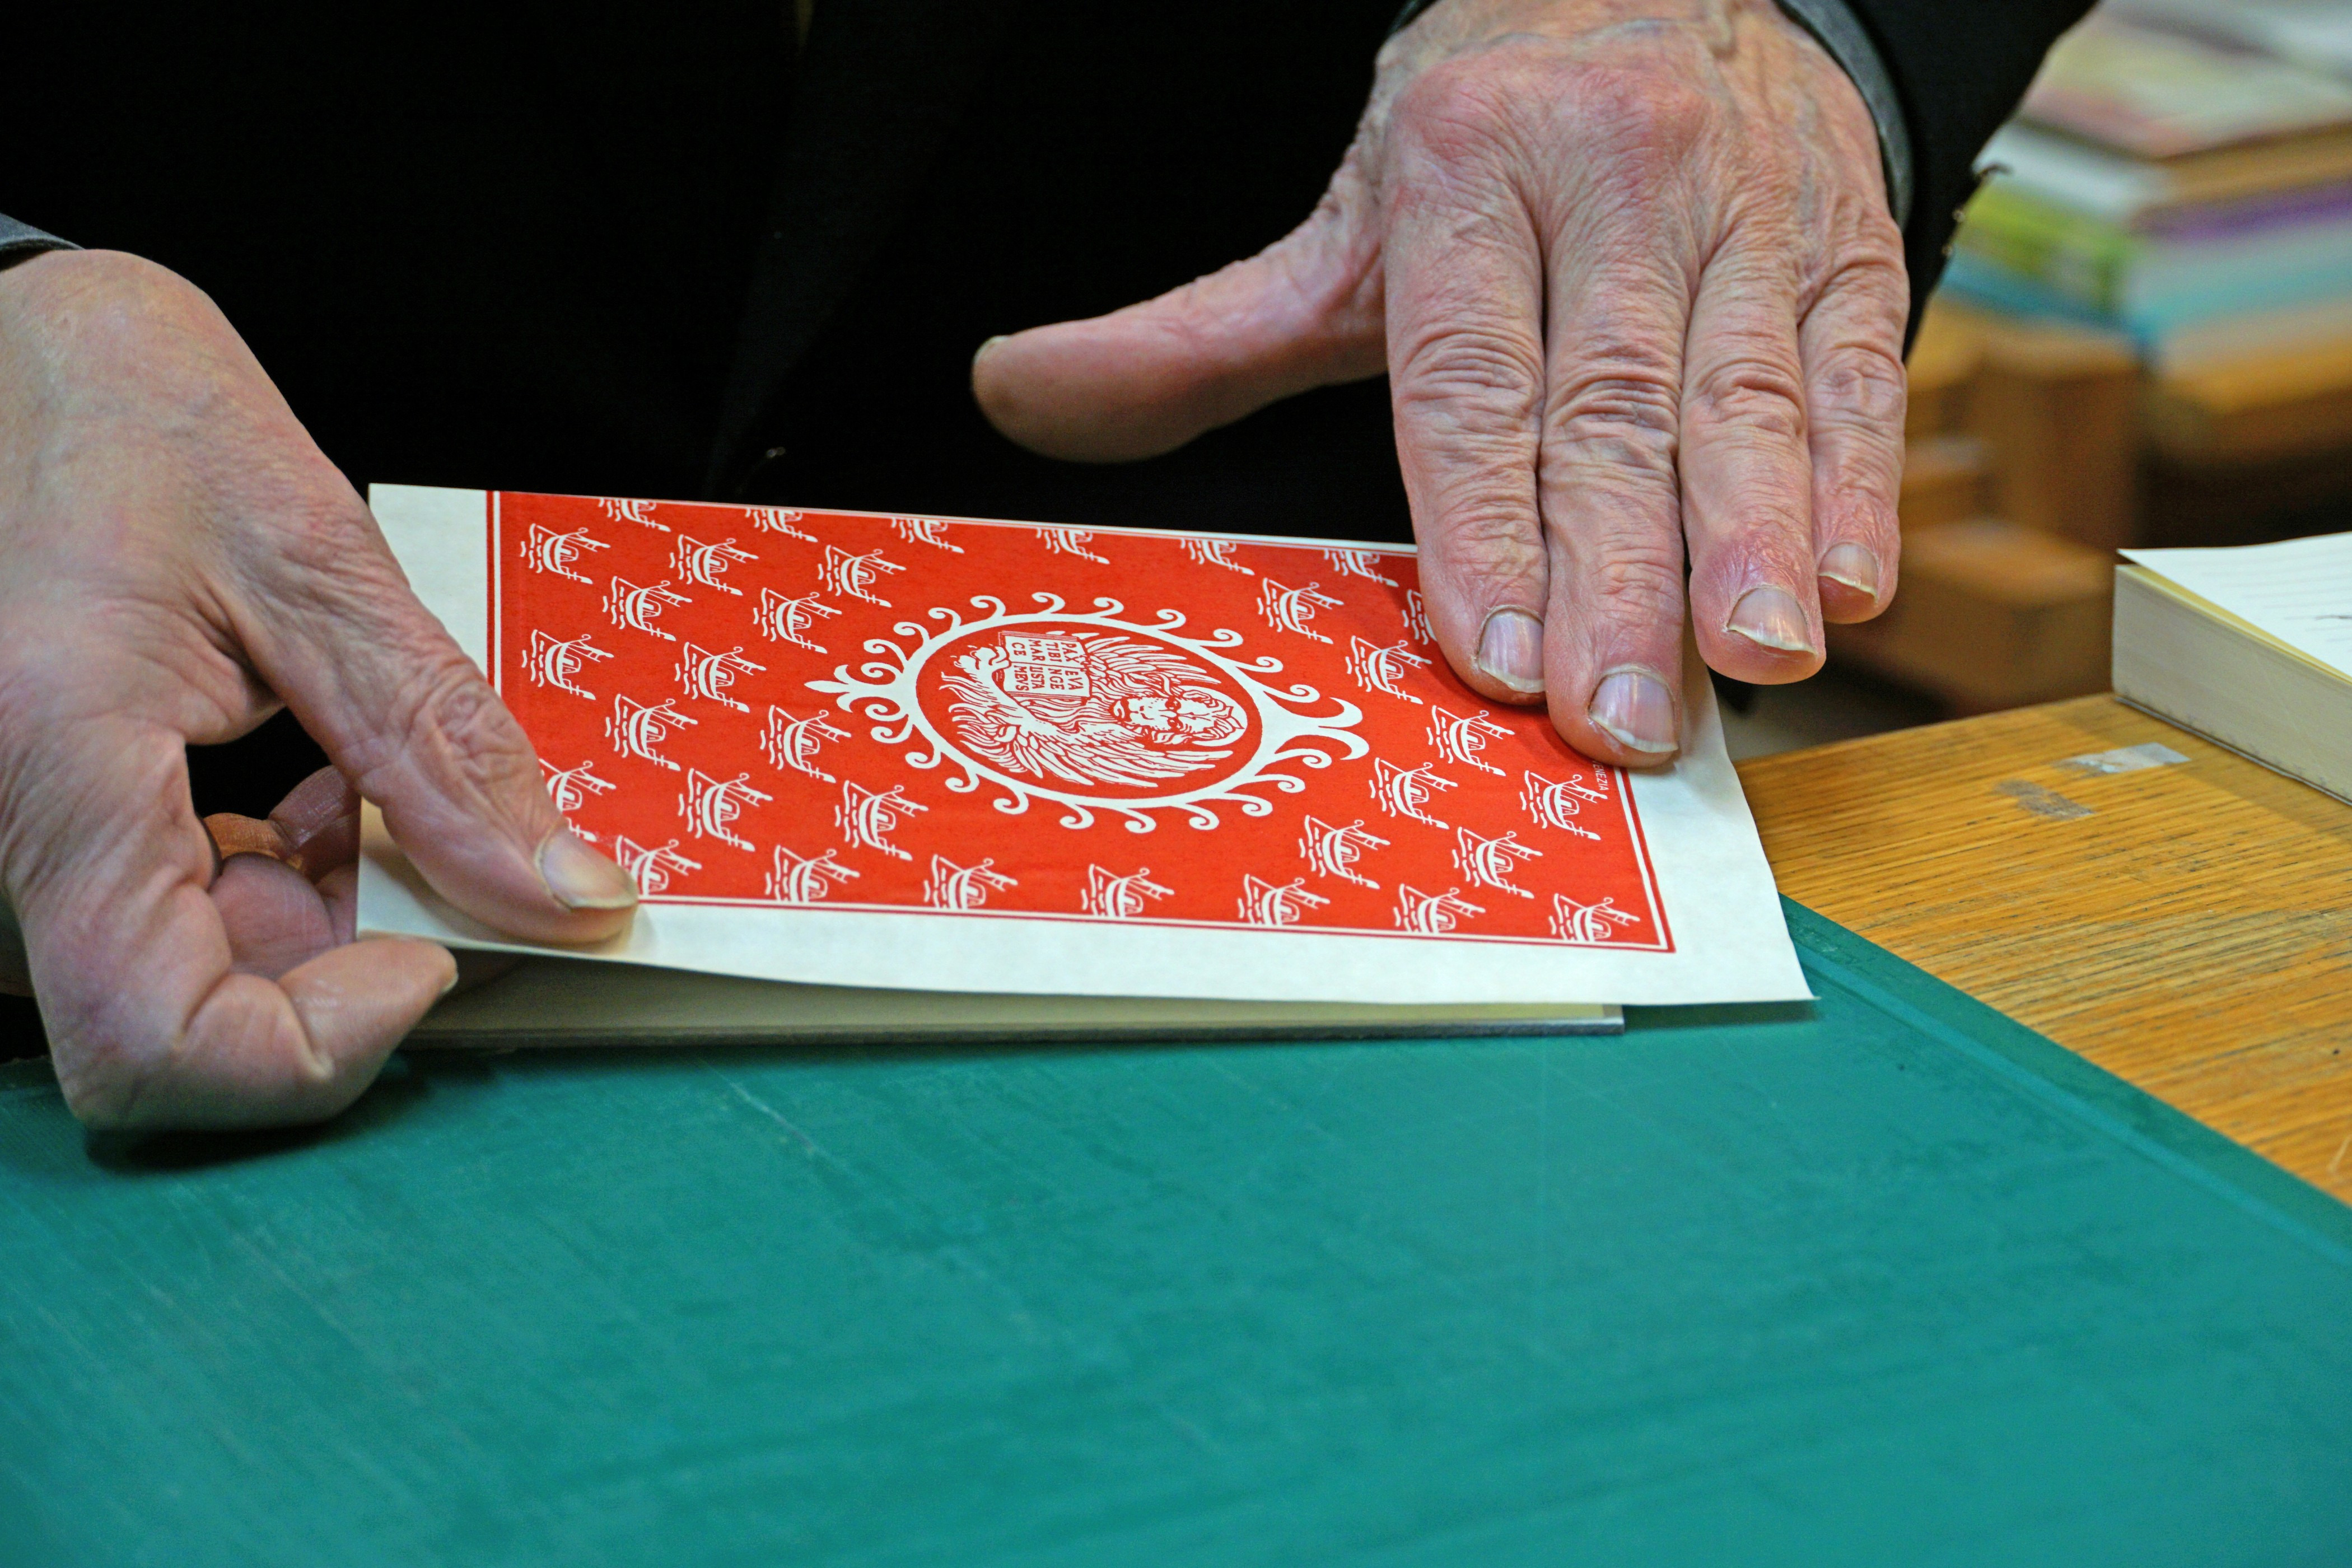 Paolo Olbi: Preserving the Art of Bookbinding in Venice